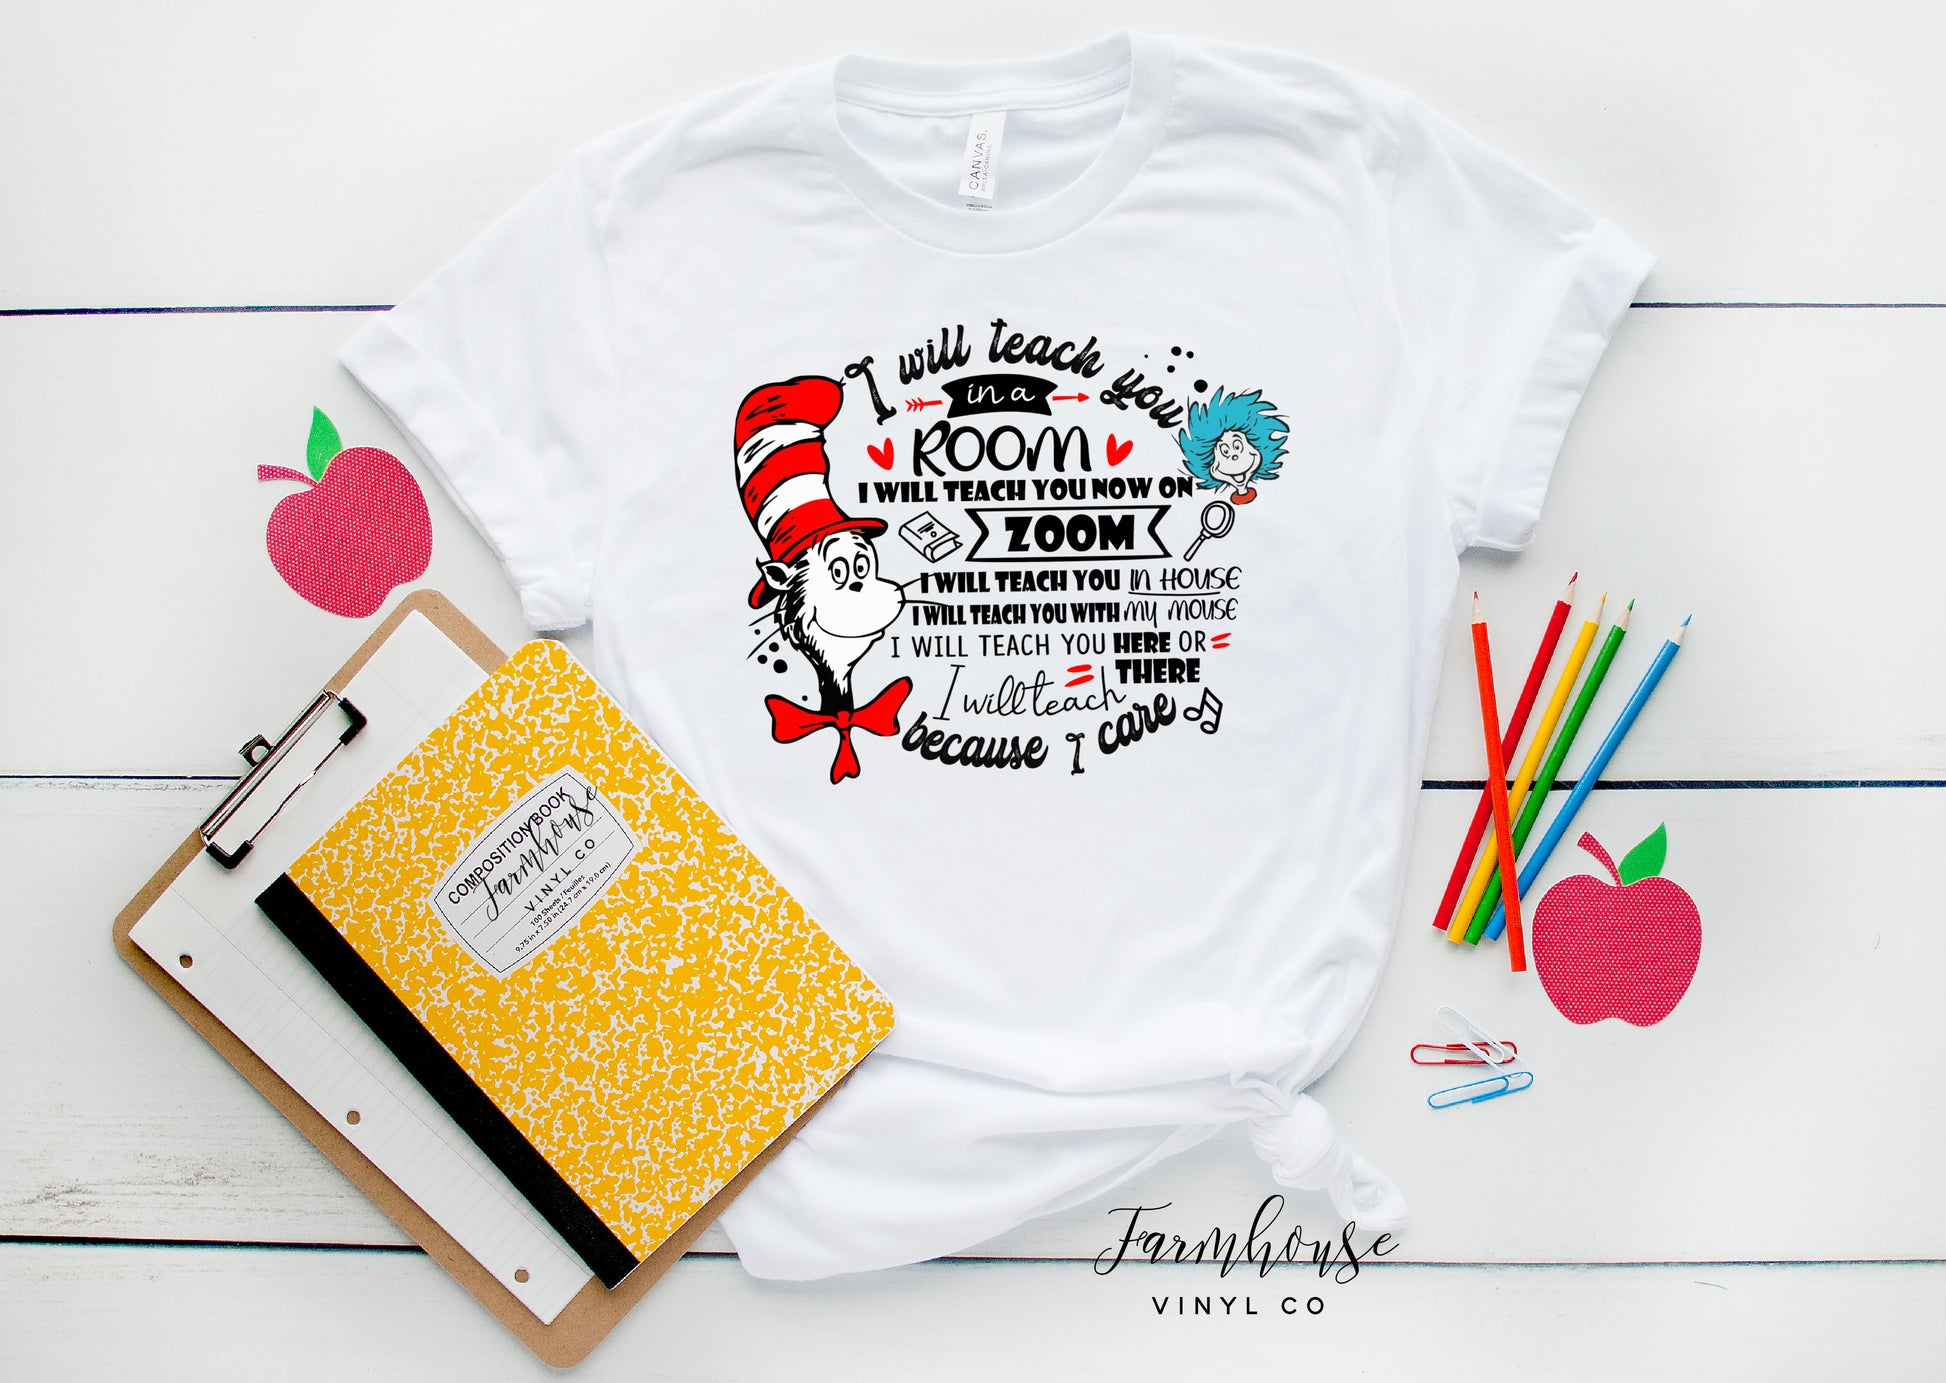 Dr Suess Cat in the Hat I Will Teach You on Zoom Shirt - Farmhouse Vinyl Co